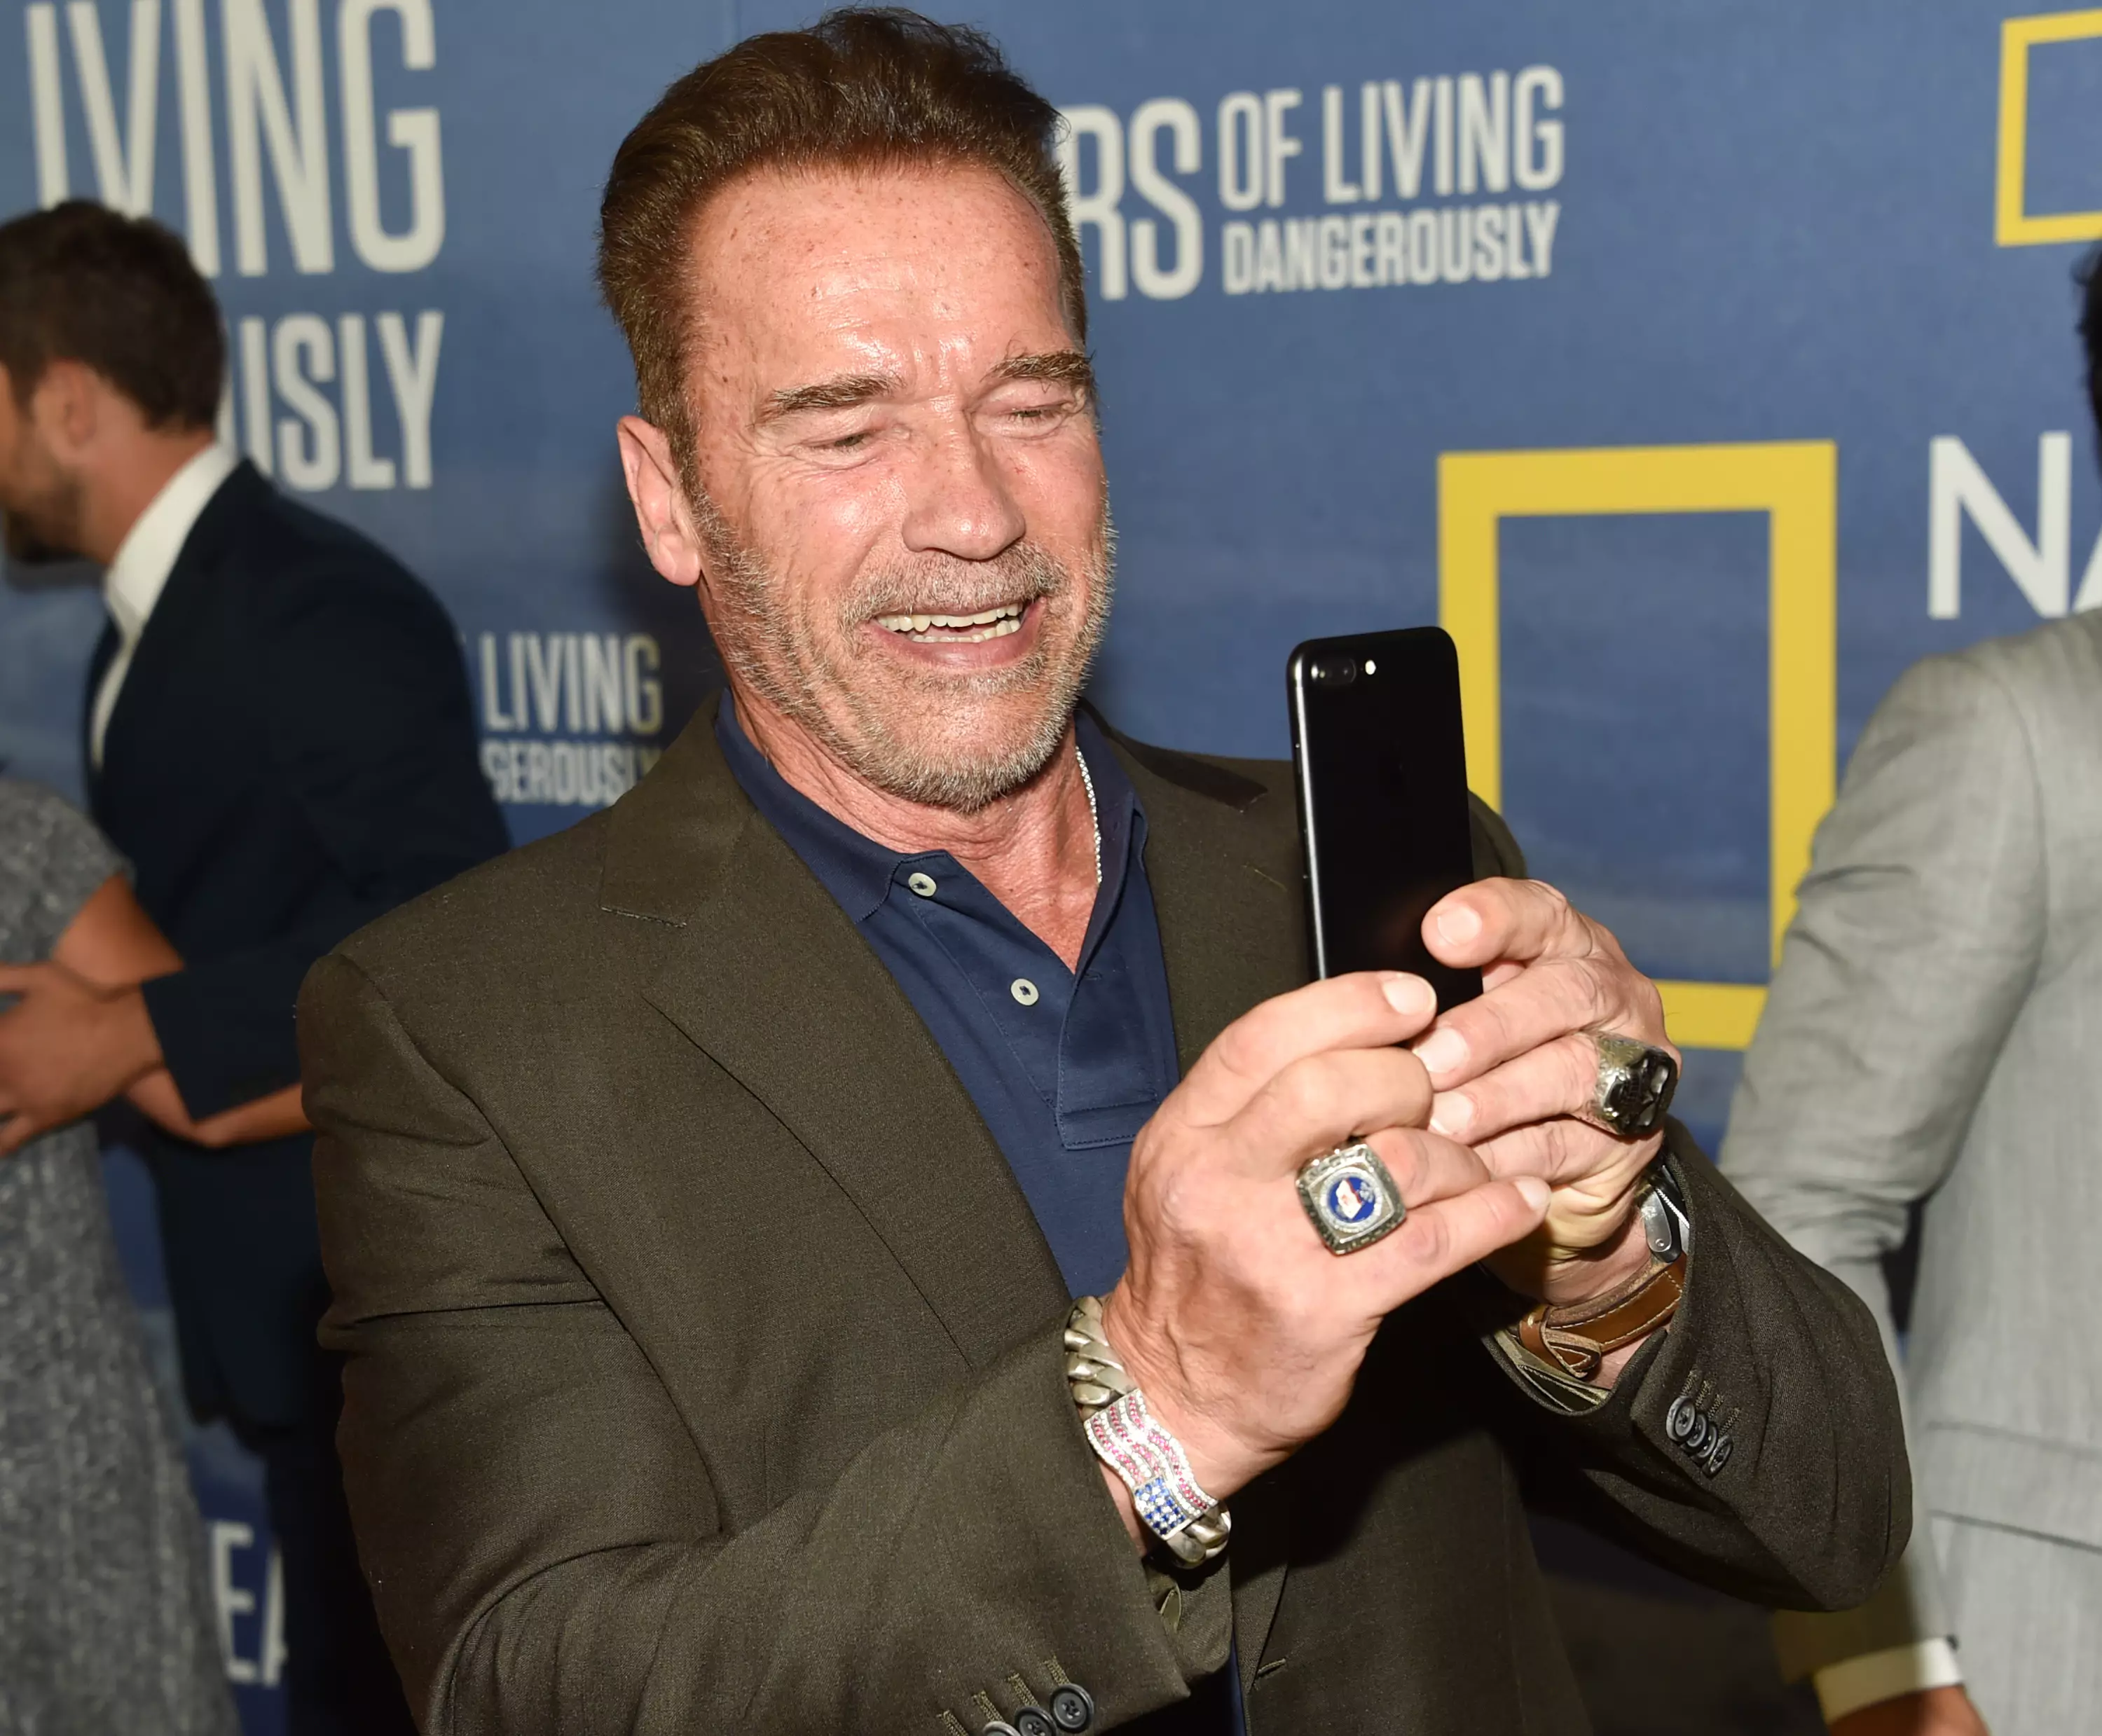 Arnold Schwarzenegger Just Got His Bodyguard Out Of A Fine By Having A Selfie